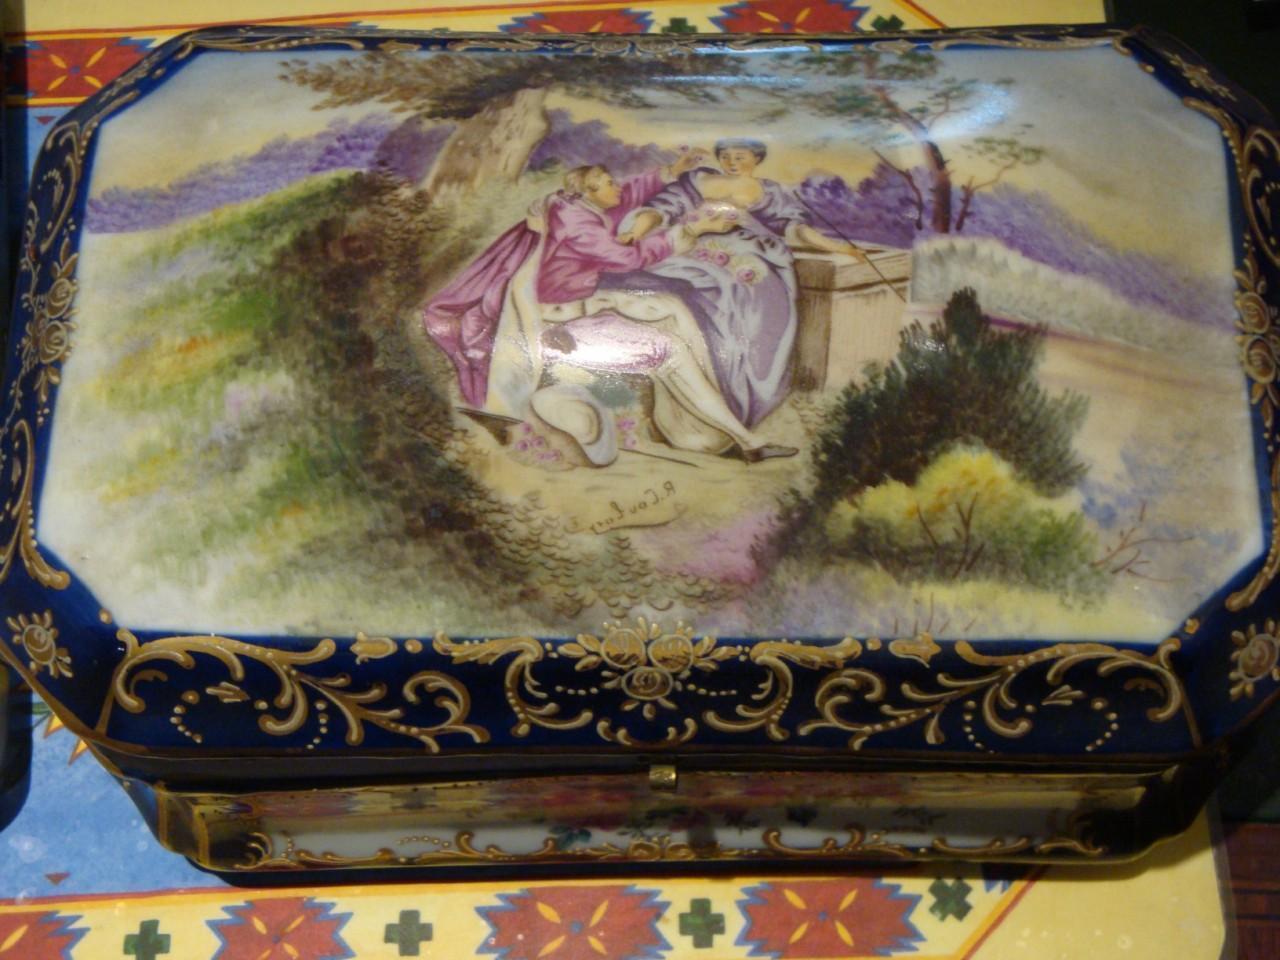 The Following Item we are offering is a Magnificent Rare Jewelry Casket Box Sevres Porcelain with Gilt Bronze Mounting. Center of Box Top is Finely Detailed with a Beautiful Portrait of Young Lovers. Taken out of an Important New York City Sutton